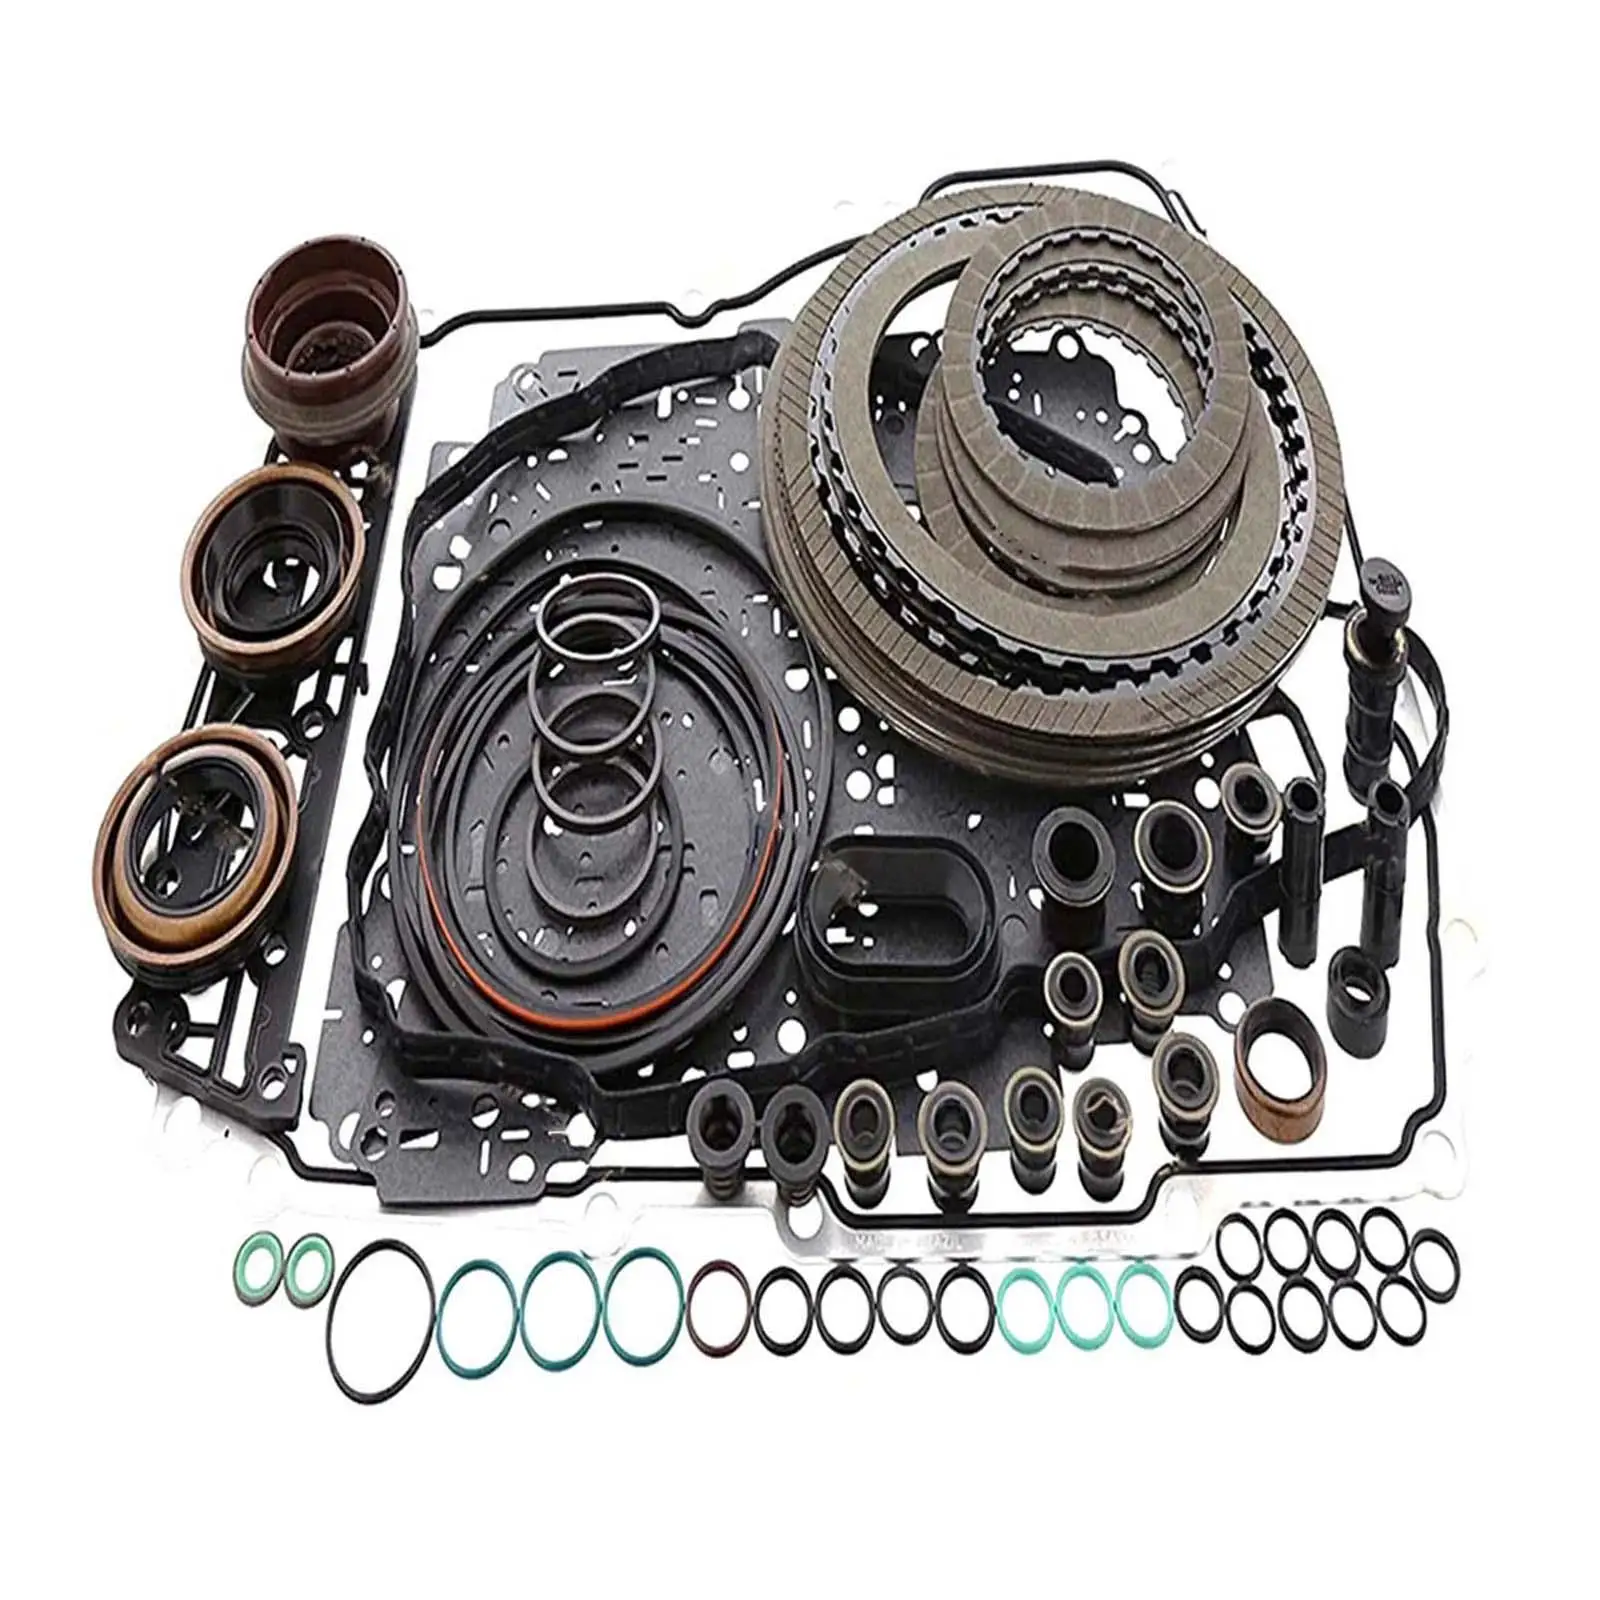 6 Speed 6T40E 6T45E 6T50E Transmission Overhaul Set Direct Replacement B204820A Wear Resistance Accessories for Chevrolet